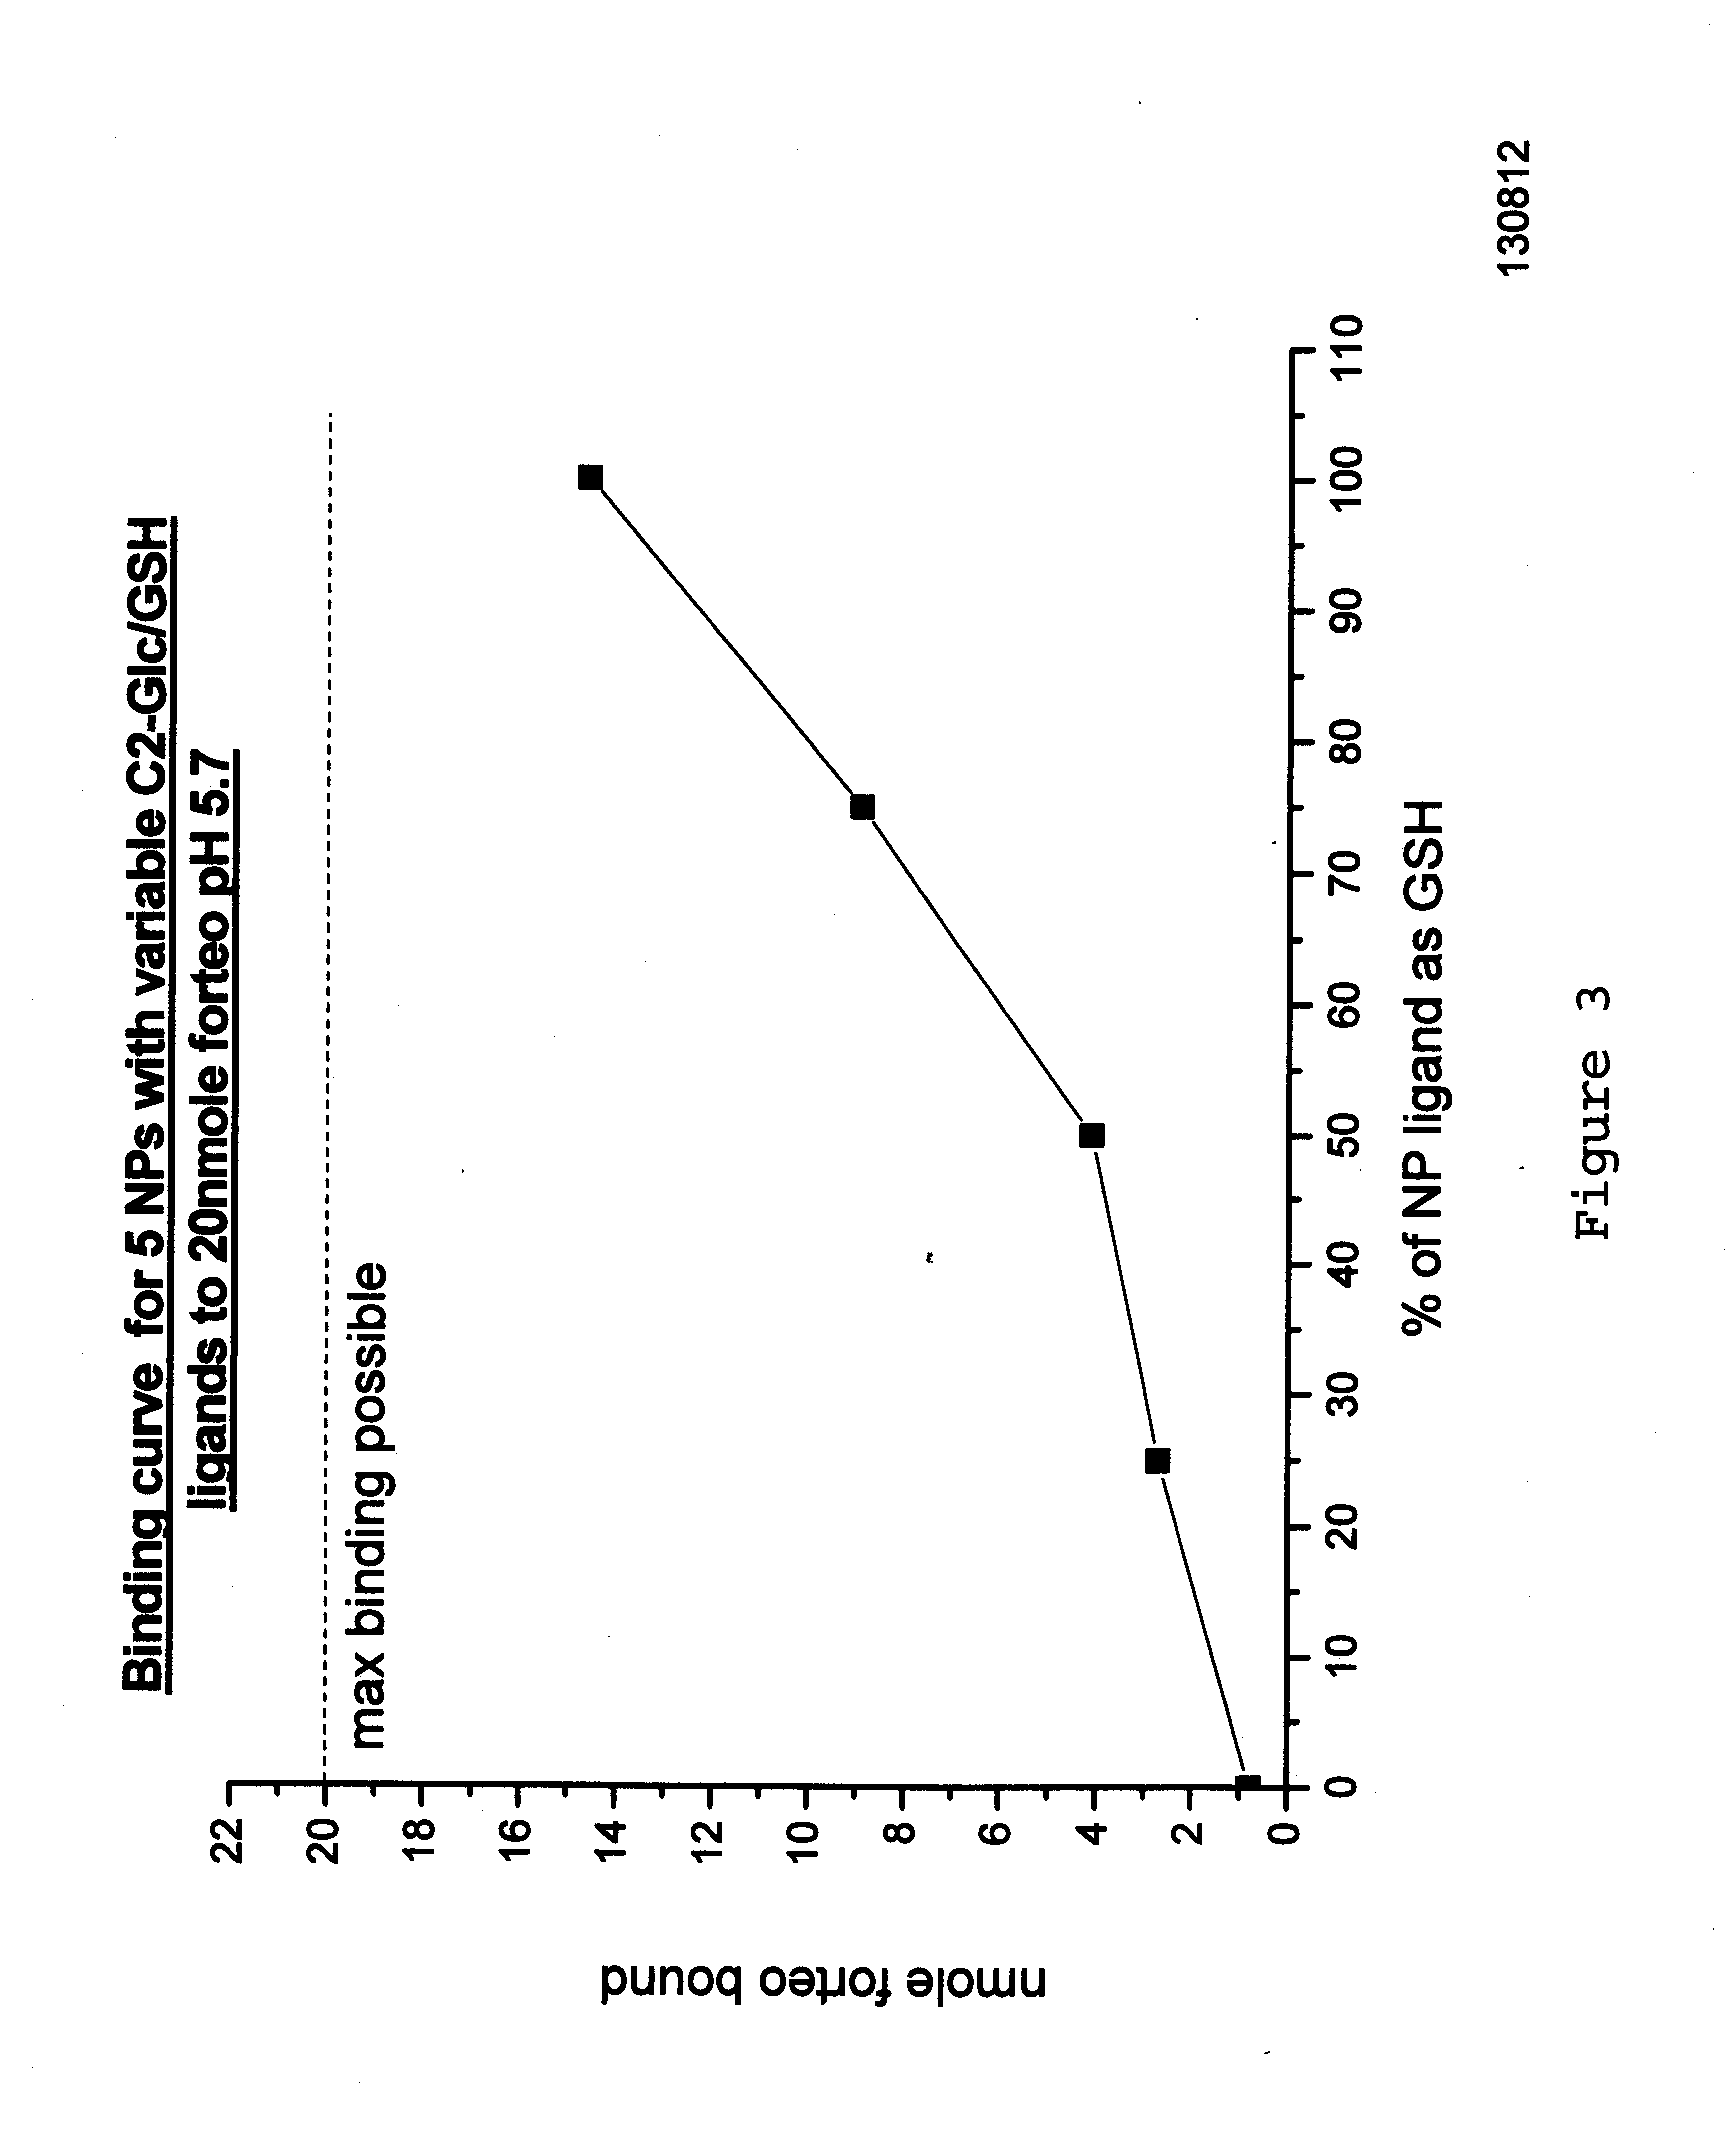 Nanoparticle peptide compositions